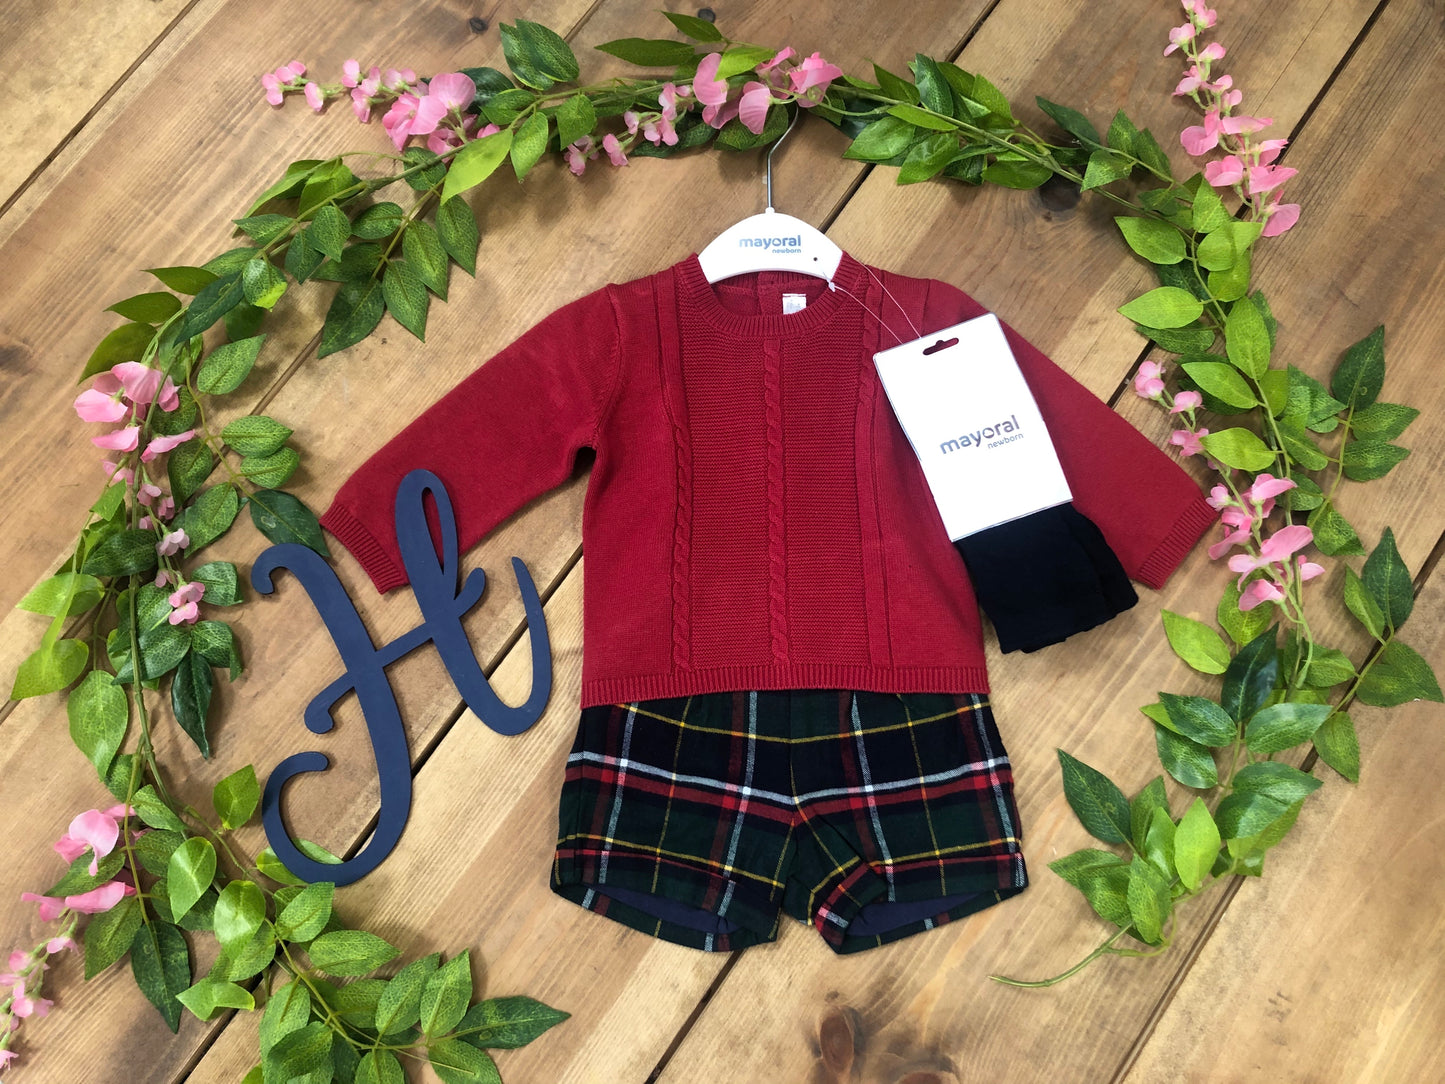 Mayoral Boys Tartan Shorts With Red Knit Jumper - Hetty's Baby Boutique